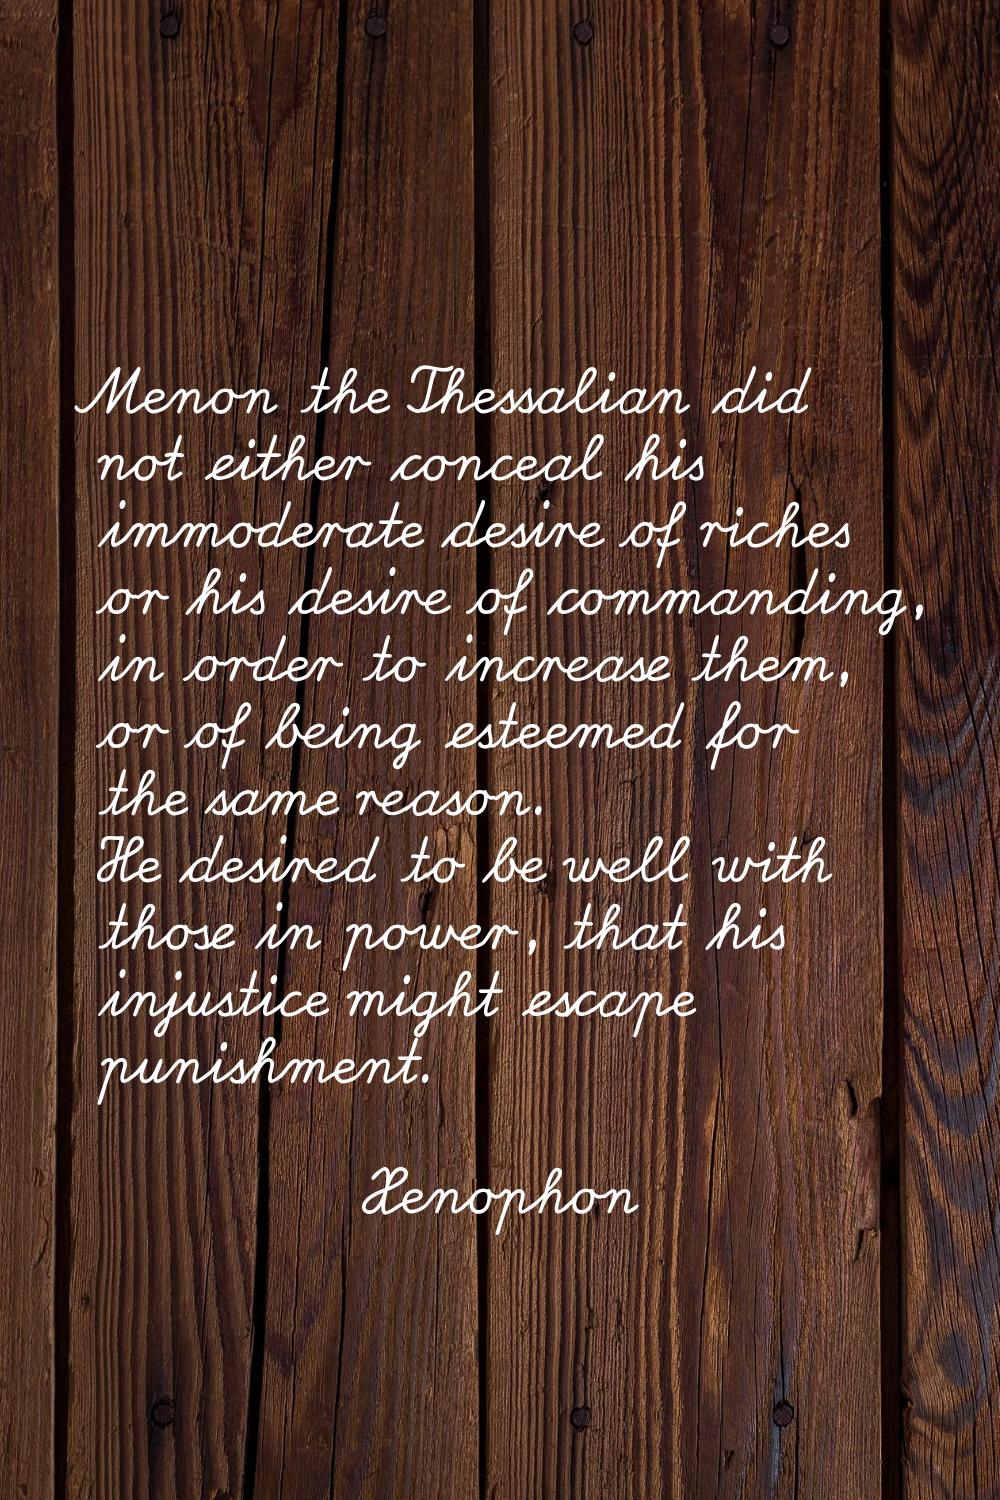 Menon the Thessalian did not either conceal his immoderate desire of riches or his desire of comman